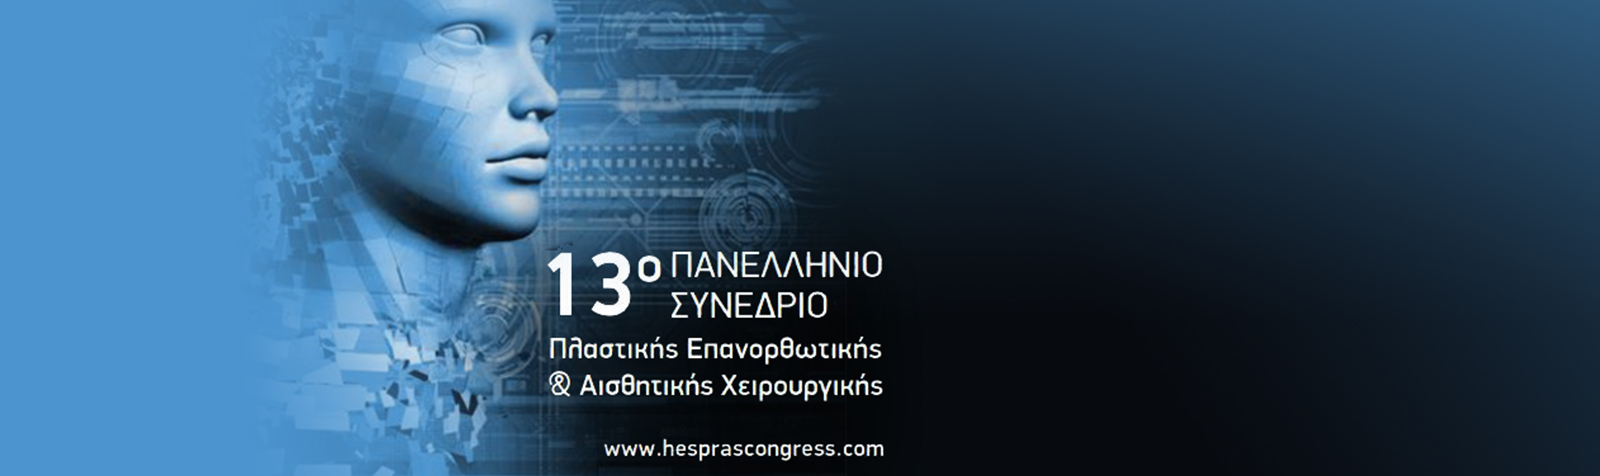 In October 16th-19th, 2019, the Hellenic Society of Plastic, reconstructive and aesthetic surgery (HESPRAS) organized the 13th Panhellenic Conference, held in Athens, Greece.